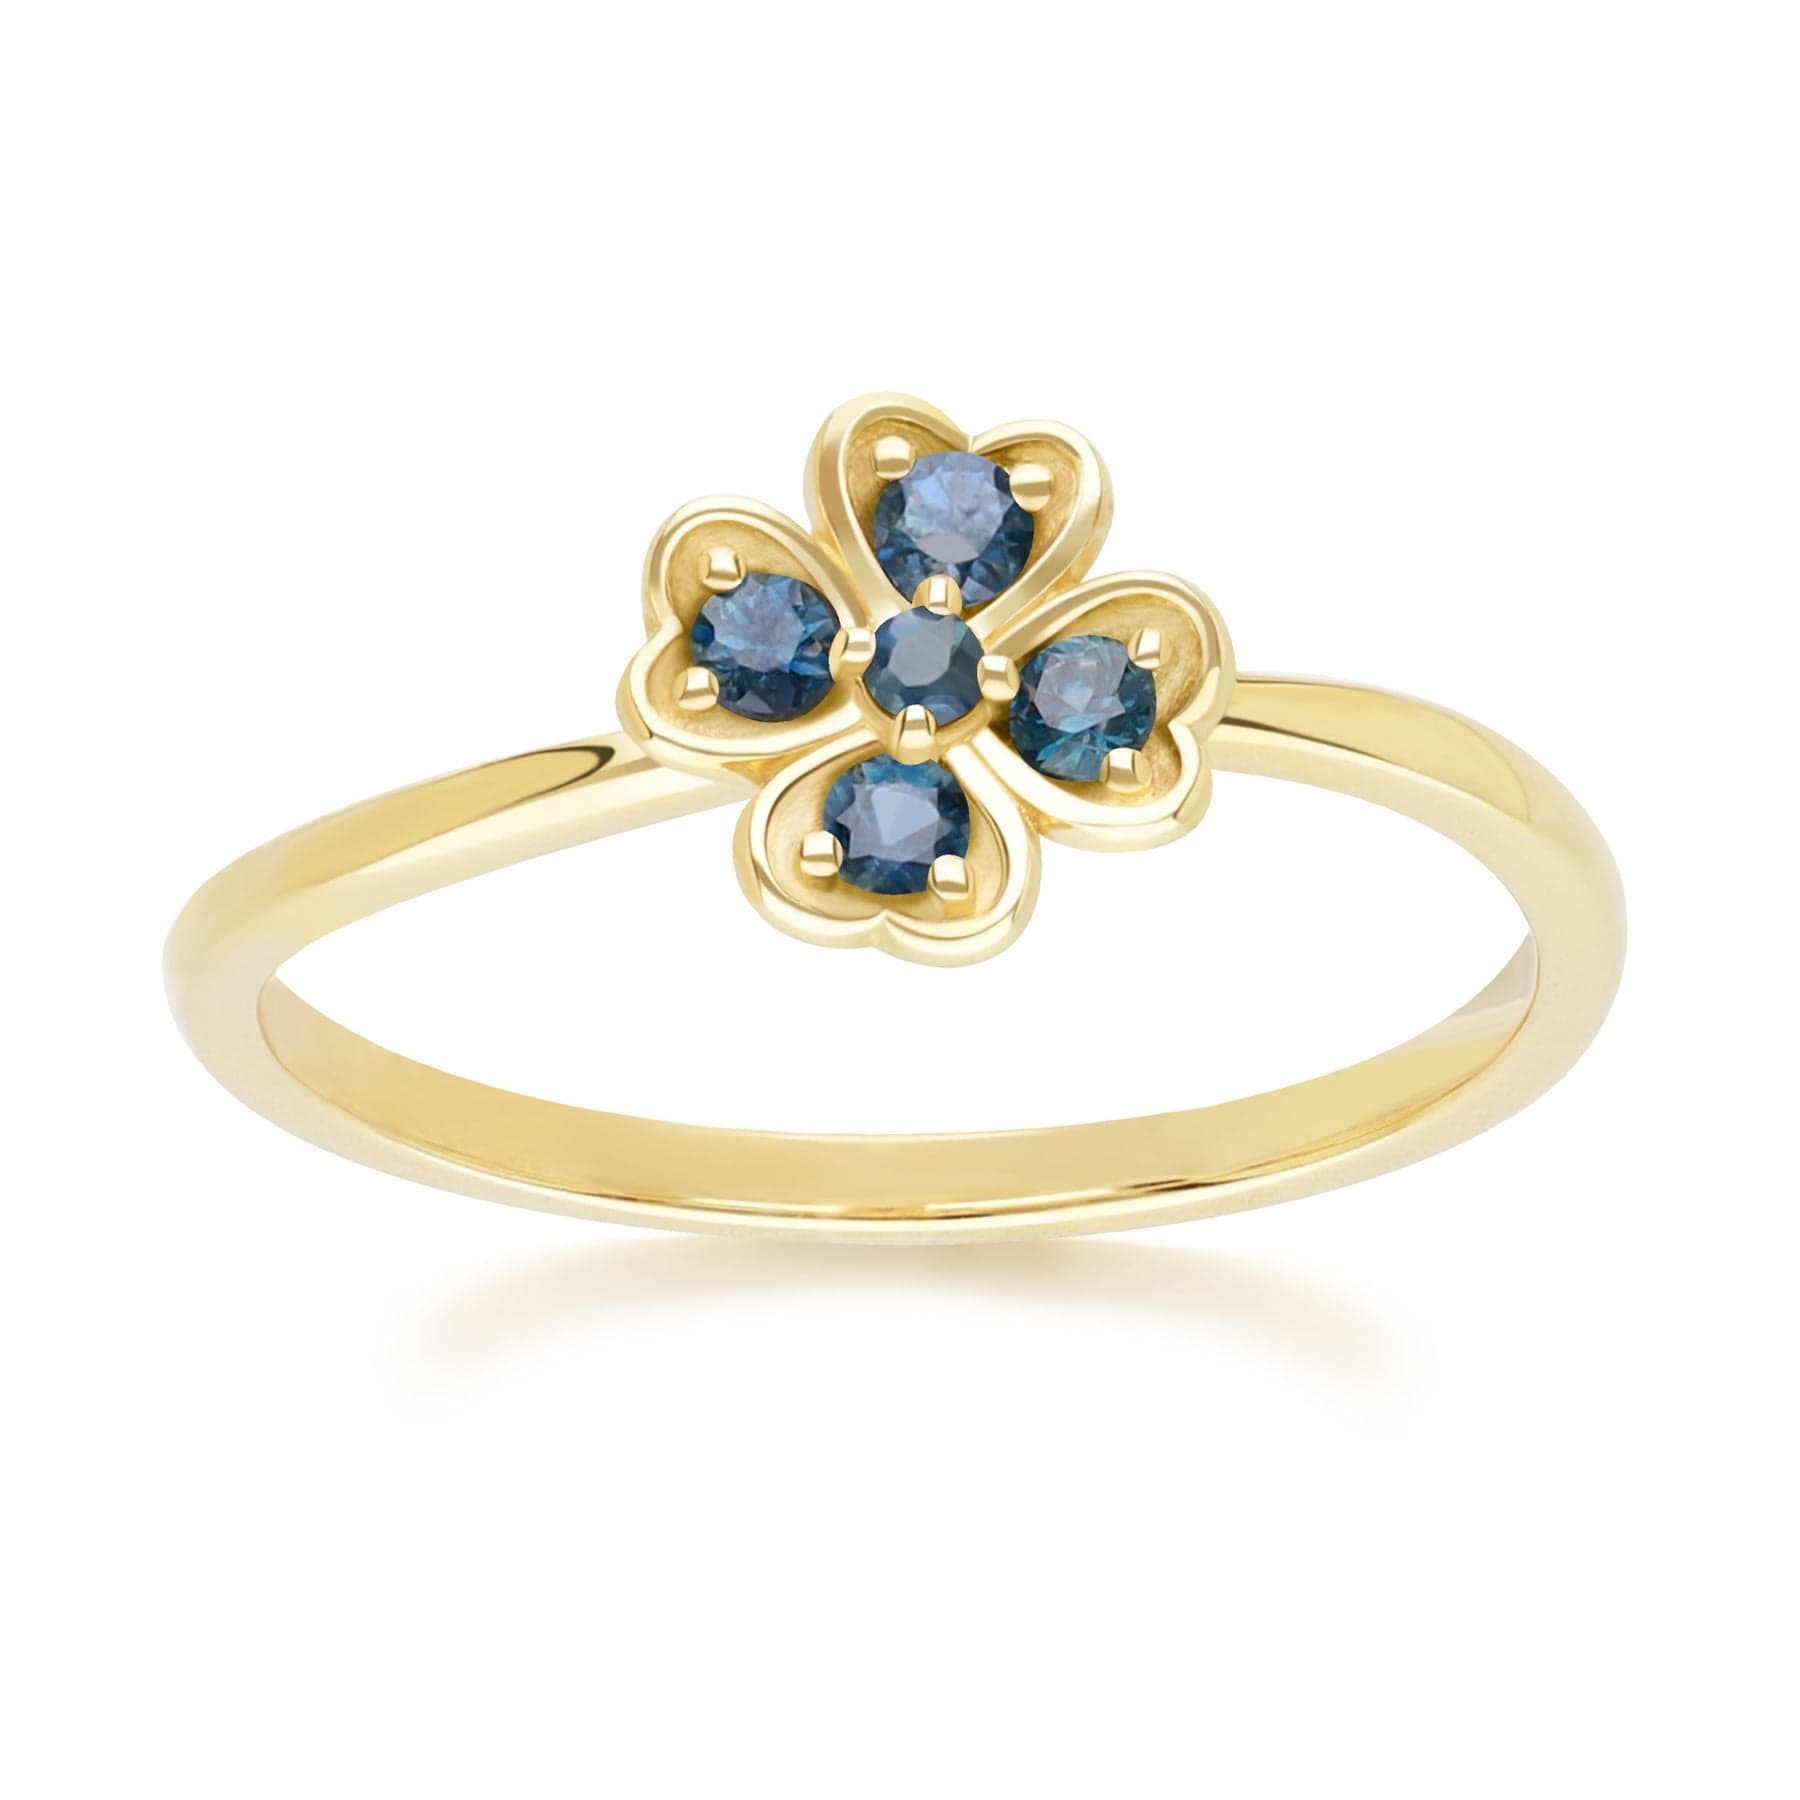 135R2102039 Gardenia Round Sapphire Clover Ring in 9ct Yellow Gold Front